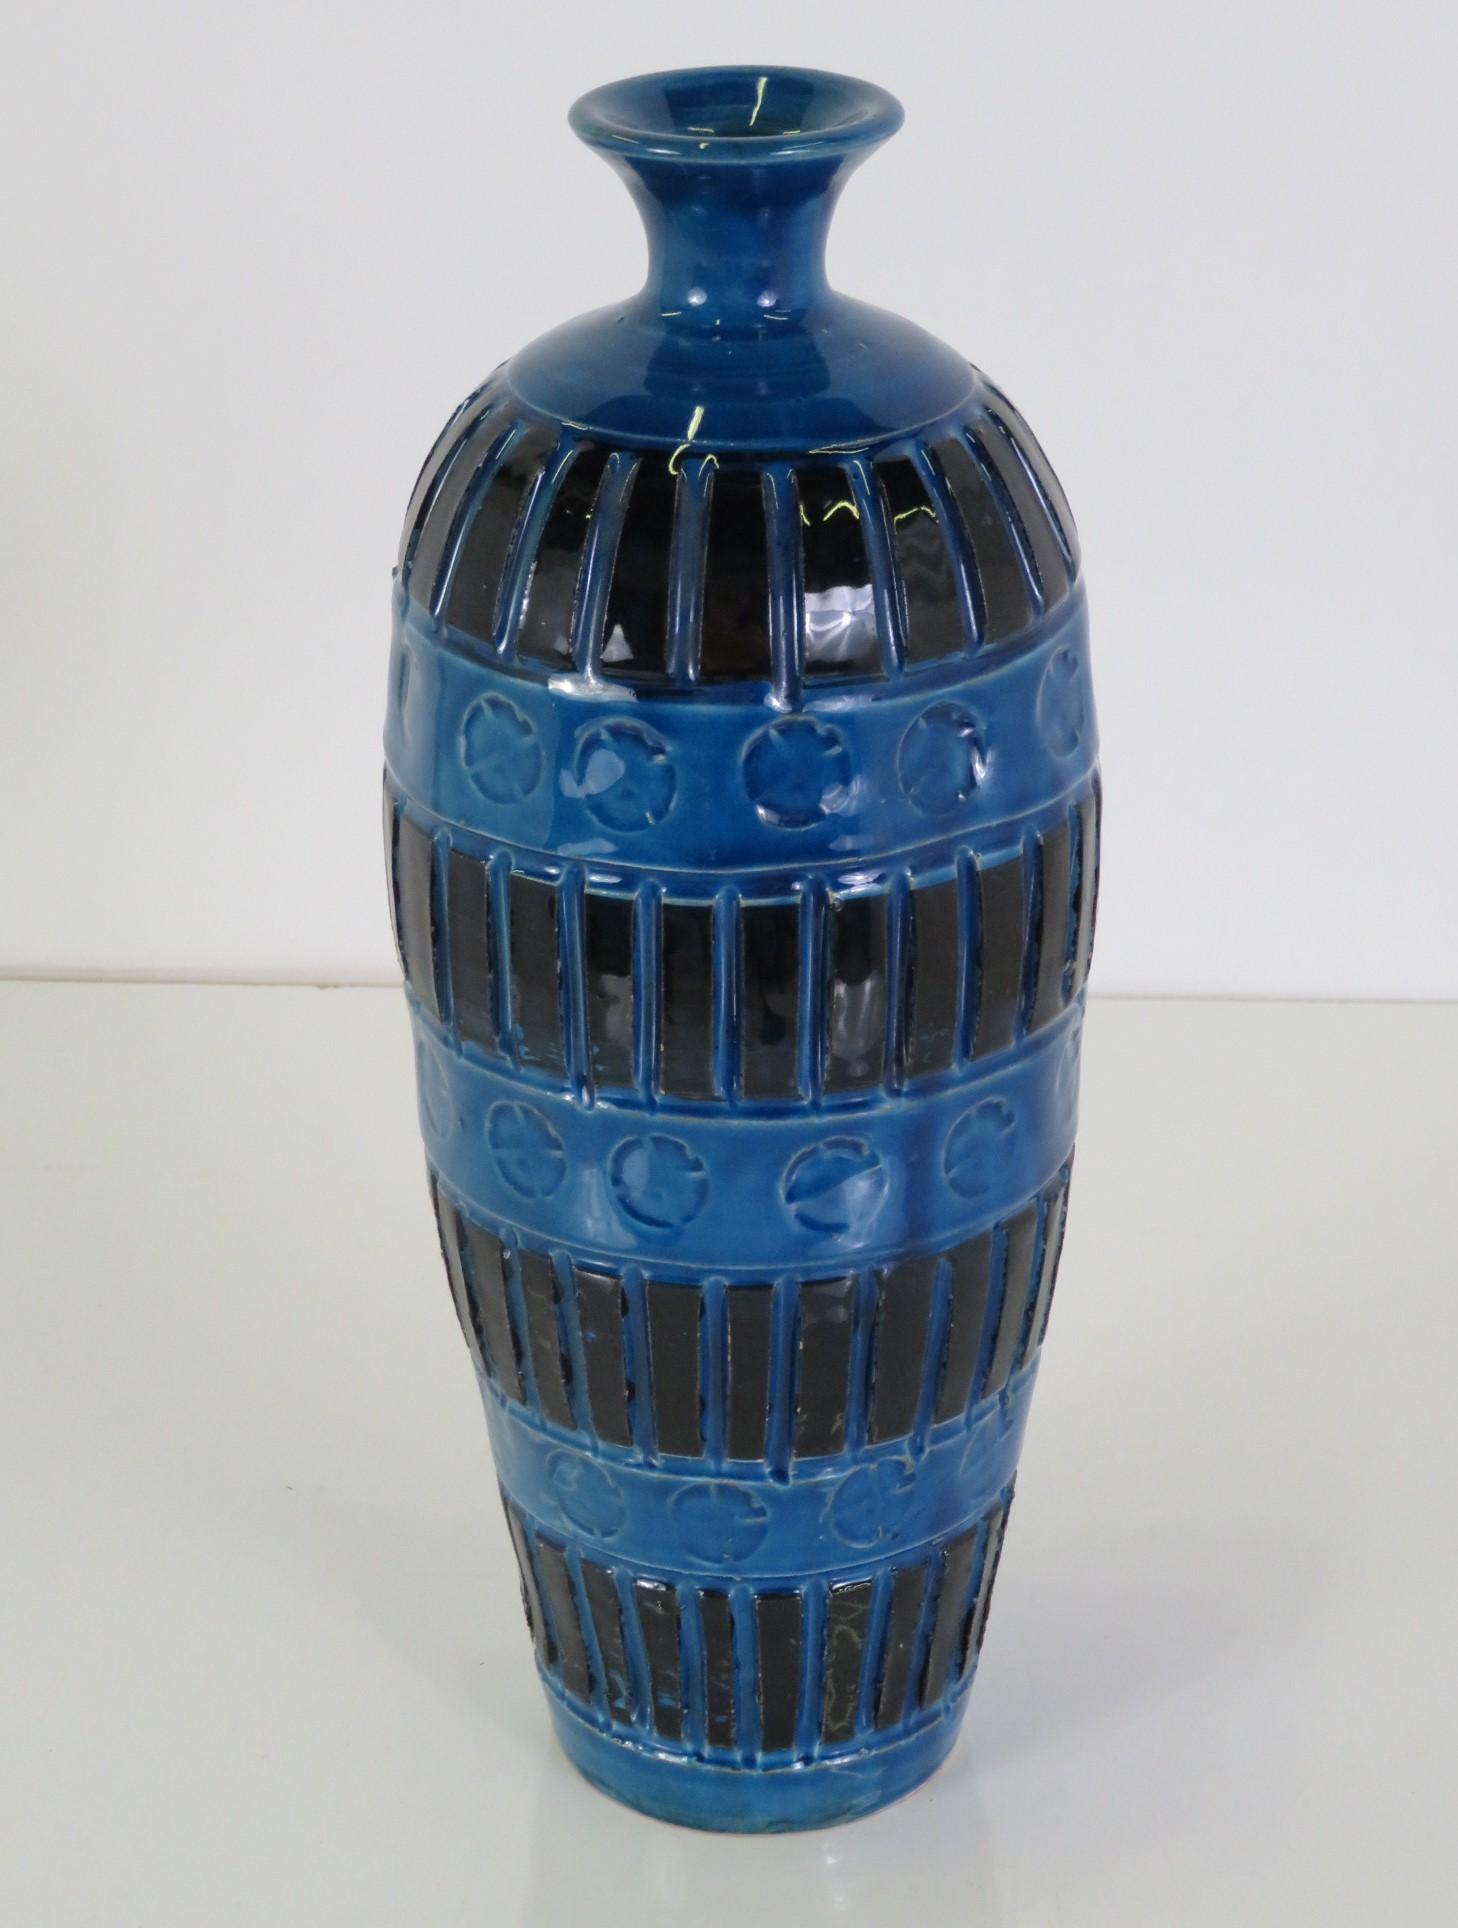 Mid-Century Modern textured Italian pottery Vase made by Fratelli Fanciullacci in the early 1960s. With a glossy Rimini blue glaze over incised clay stamped with Aldo Londi's iconic round circles and heavy ribbed bands in blue black glaze. Terracota